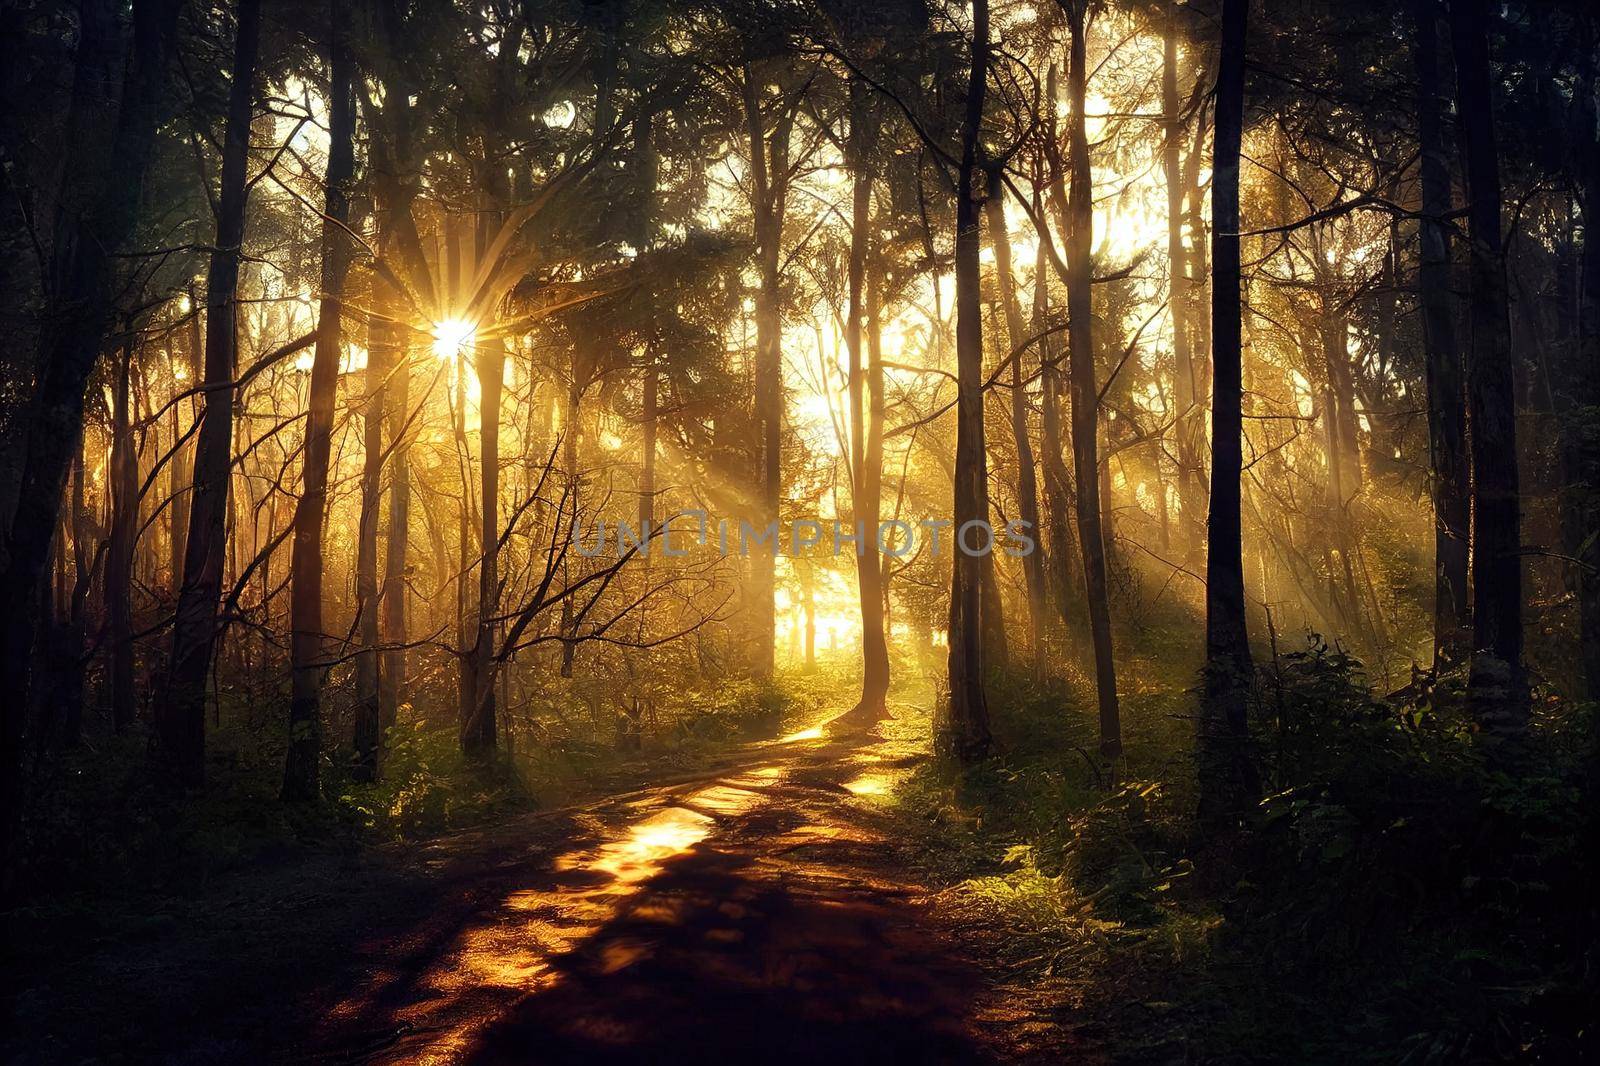 Sunset Or Sunrise In Forest Landscape. Sun Sunshine With Natural Sunlight And Sun Rays Through Woods Trees In Summer Forest. Beautiful Scenic View. Natural Real Lens Flare Effect. High quality illustration